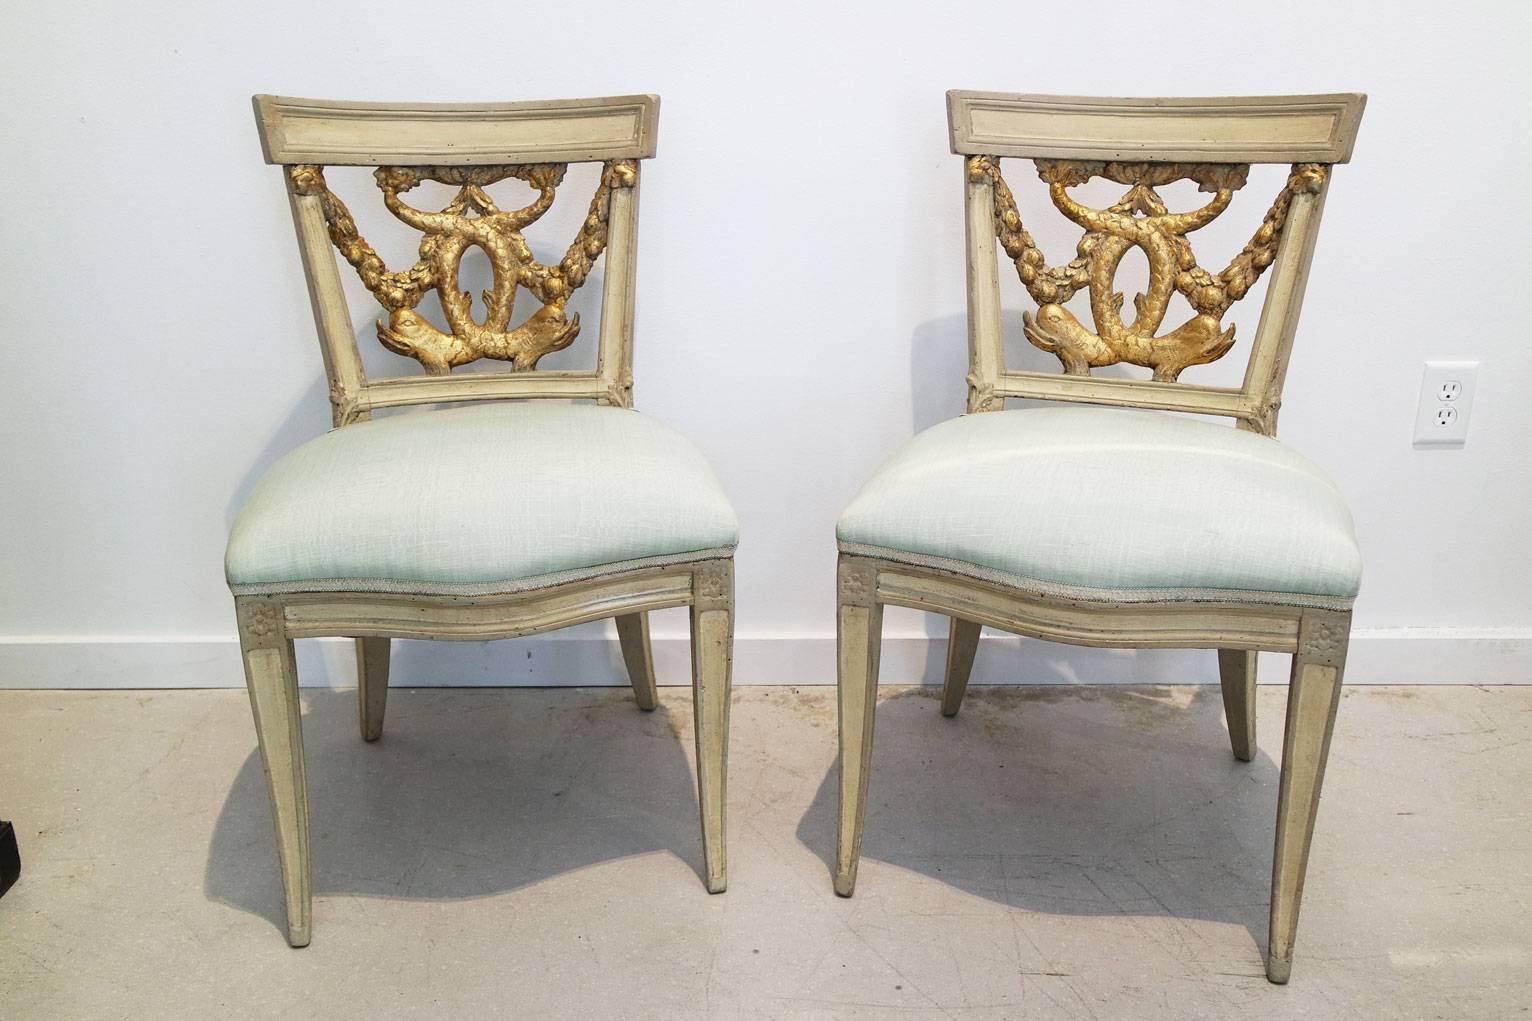 A pair of Italian neoclassical painted and partial gilt side chairs. Last quarter 18th century with dolphin and foliate swags.